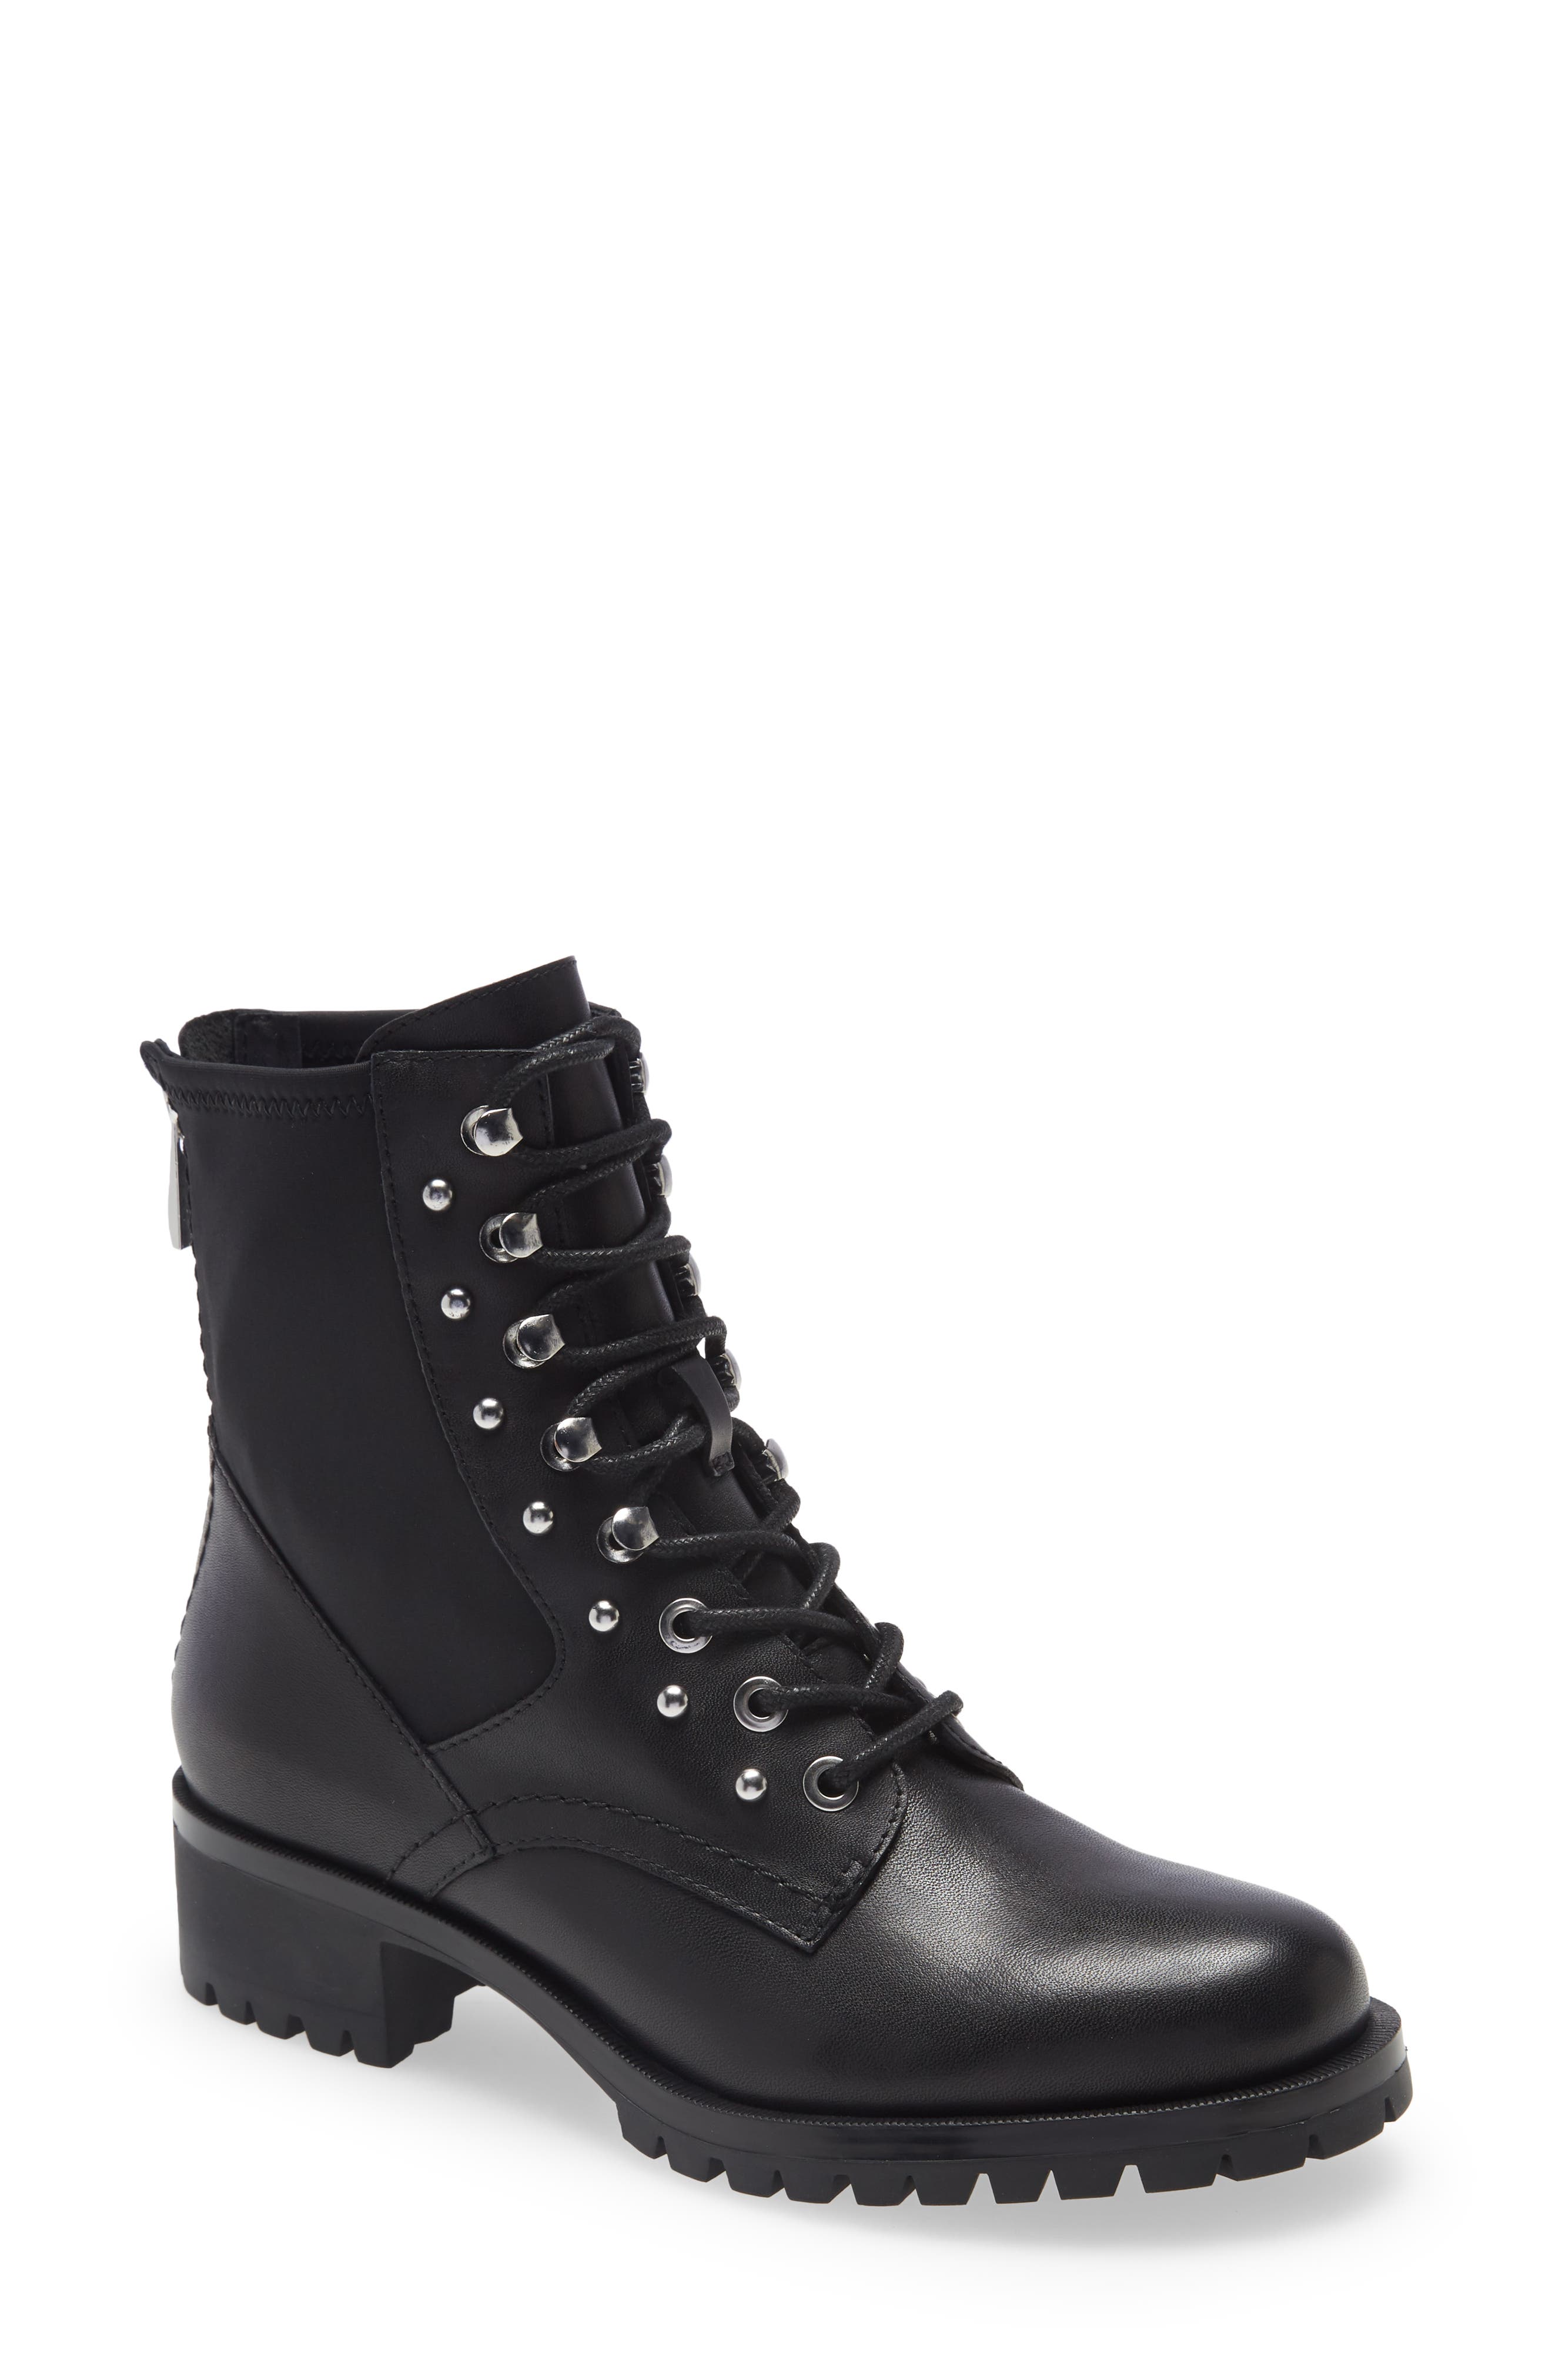 PAIGE PERRI LACE-UP BOOT,190161777900